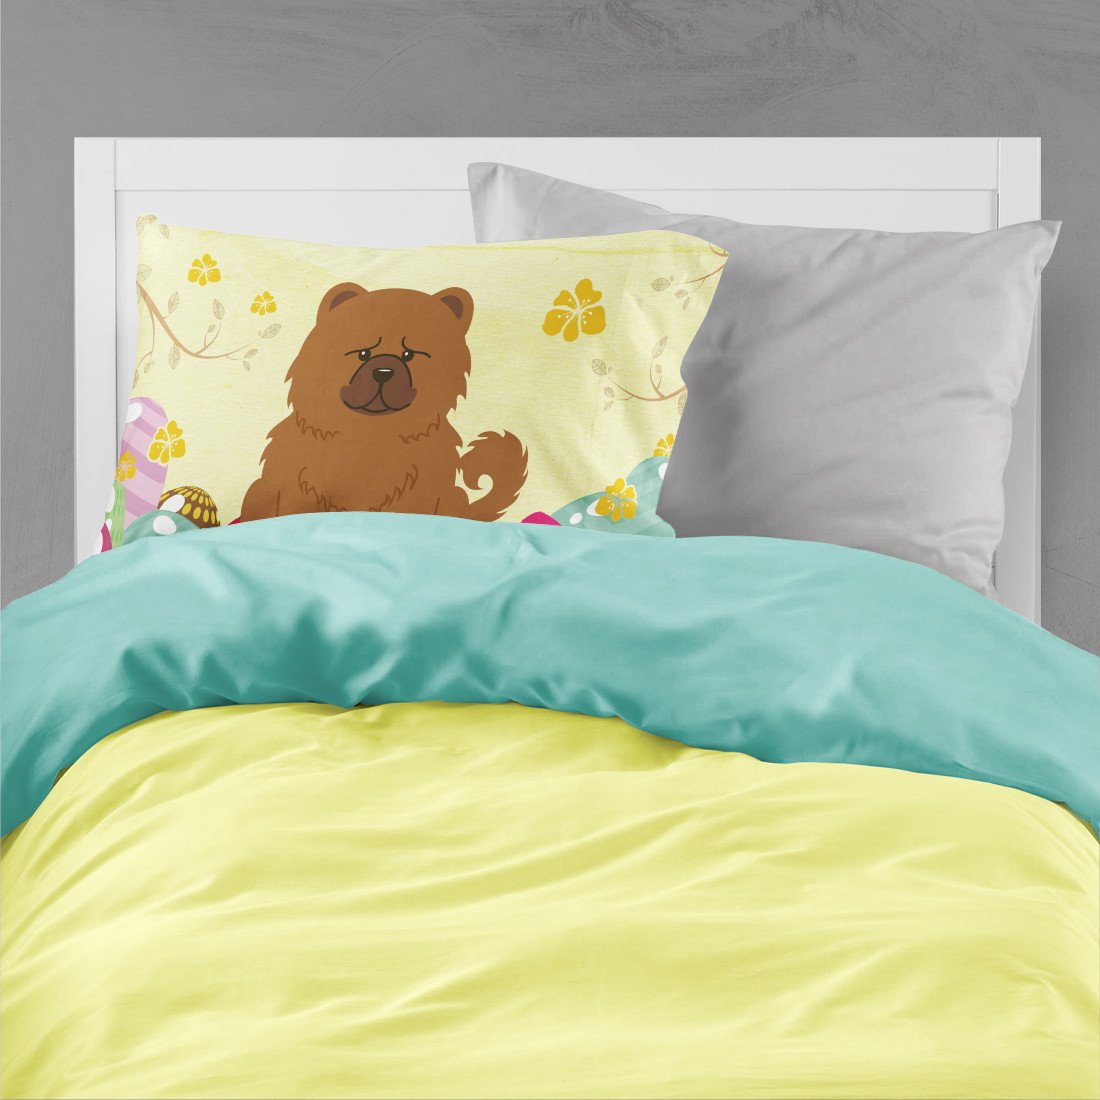 Easter Eggs Chow Chow Red Fabric Standard Pillowcase BB6142PILLOWCASE by Caroline's Treasures